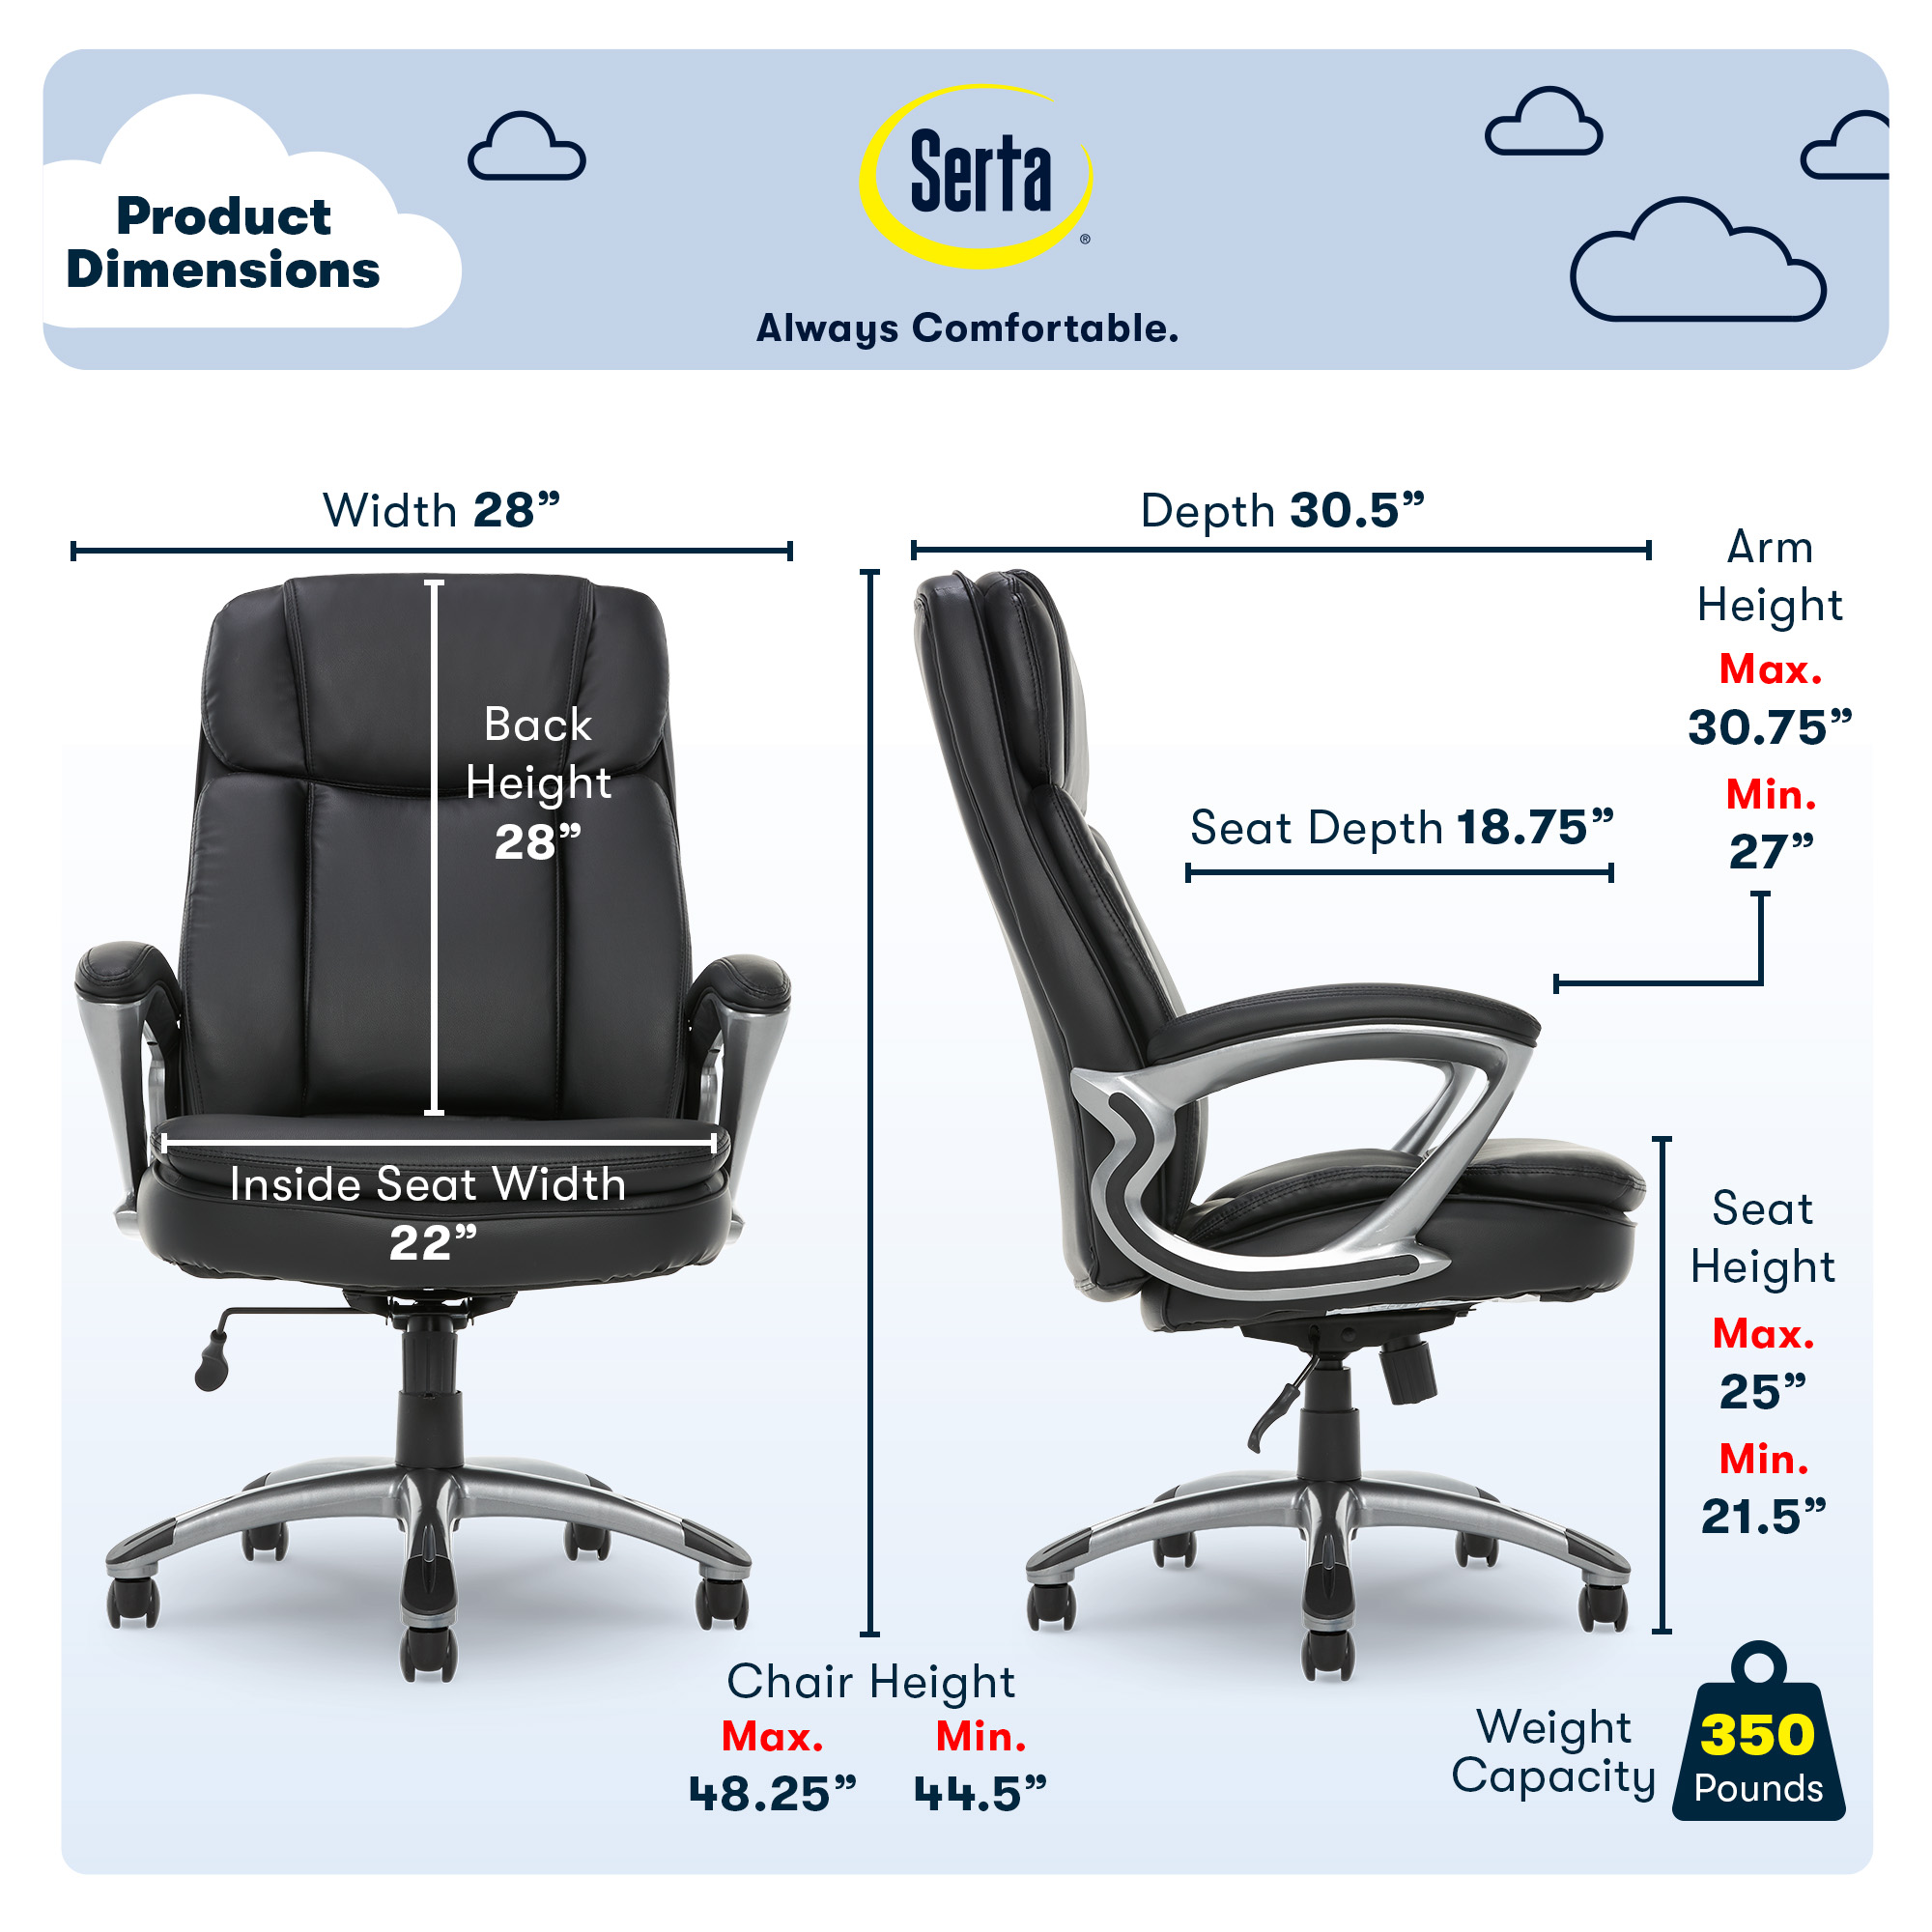 Serta Puresoft Faux Leather Big and Tall Executive Office Chair, Black - image 3 of 22